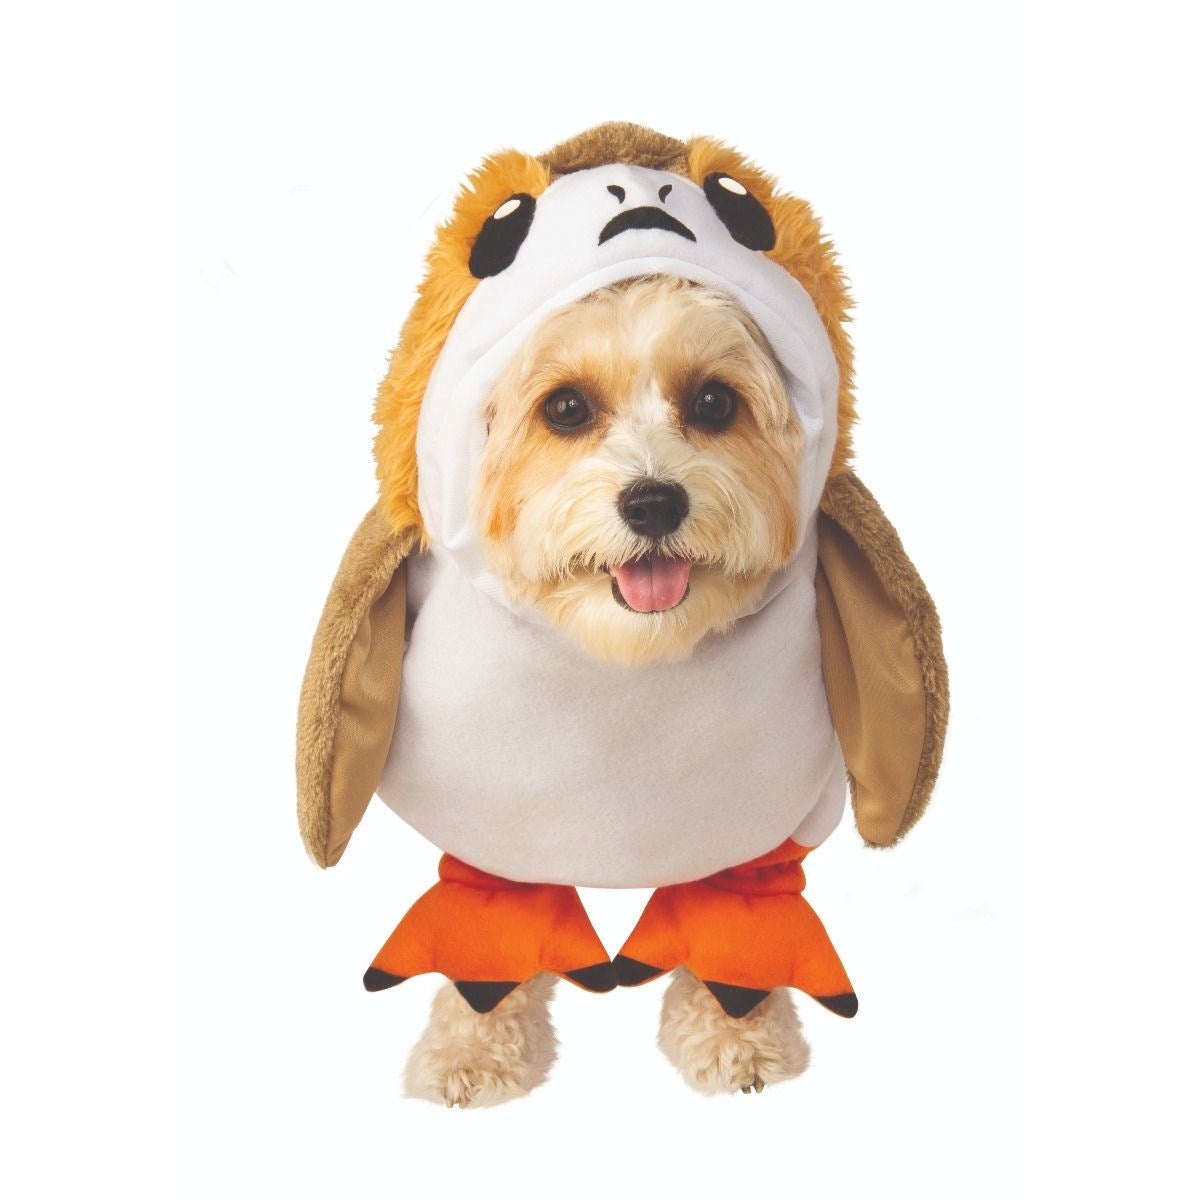  STAR WARS Dog Shirts - Officially Licensed